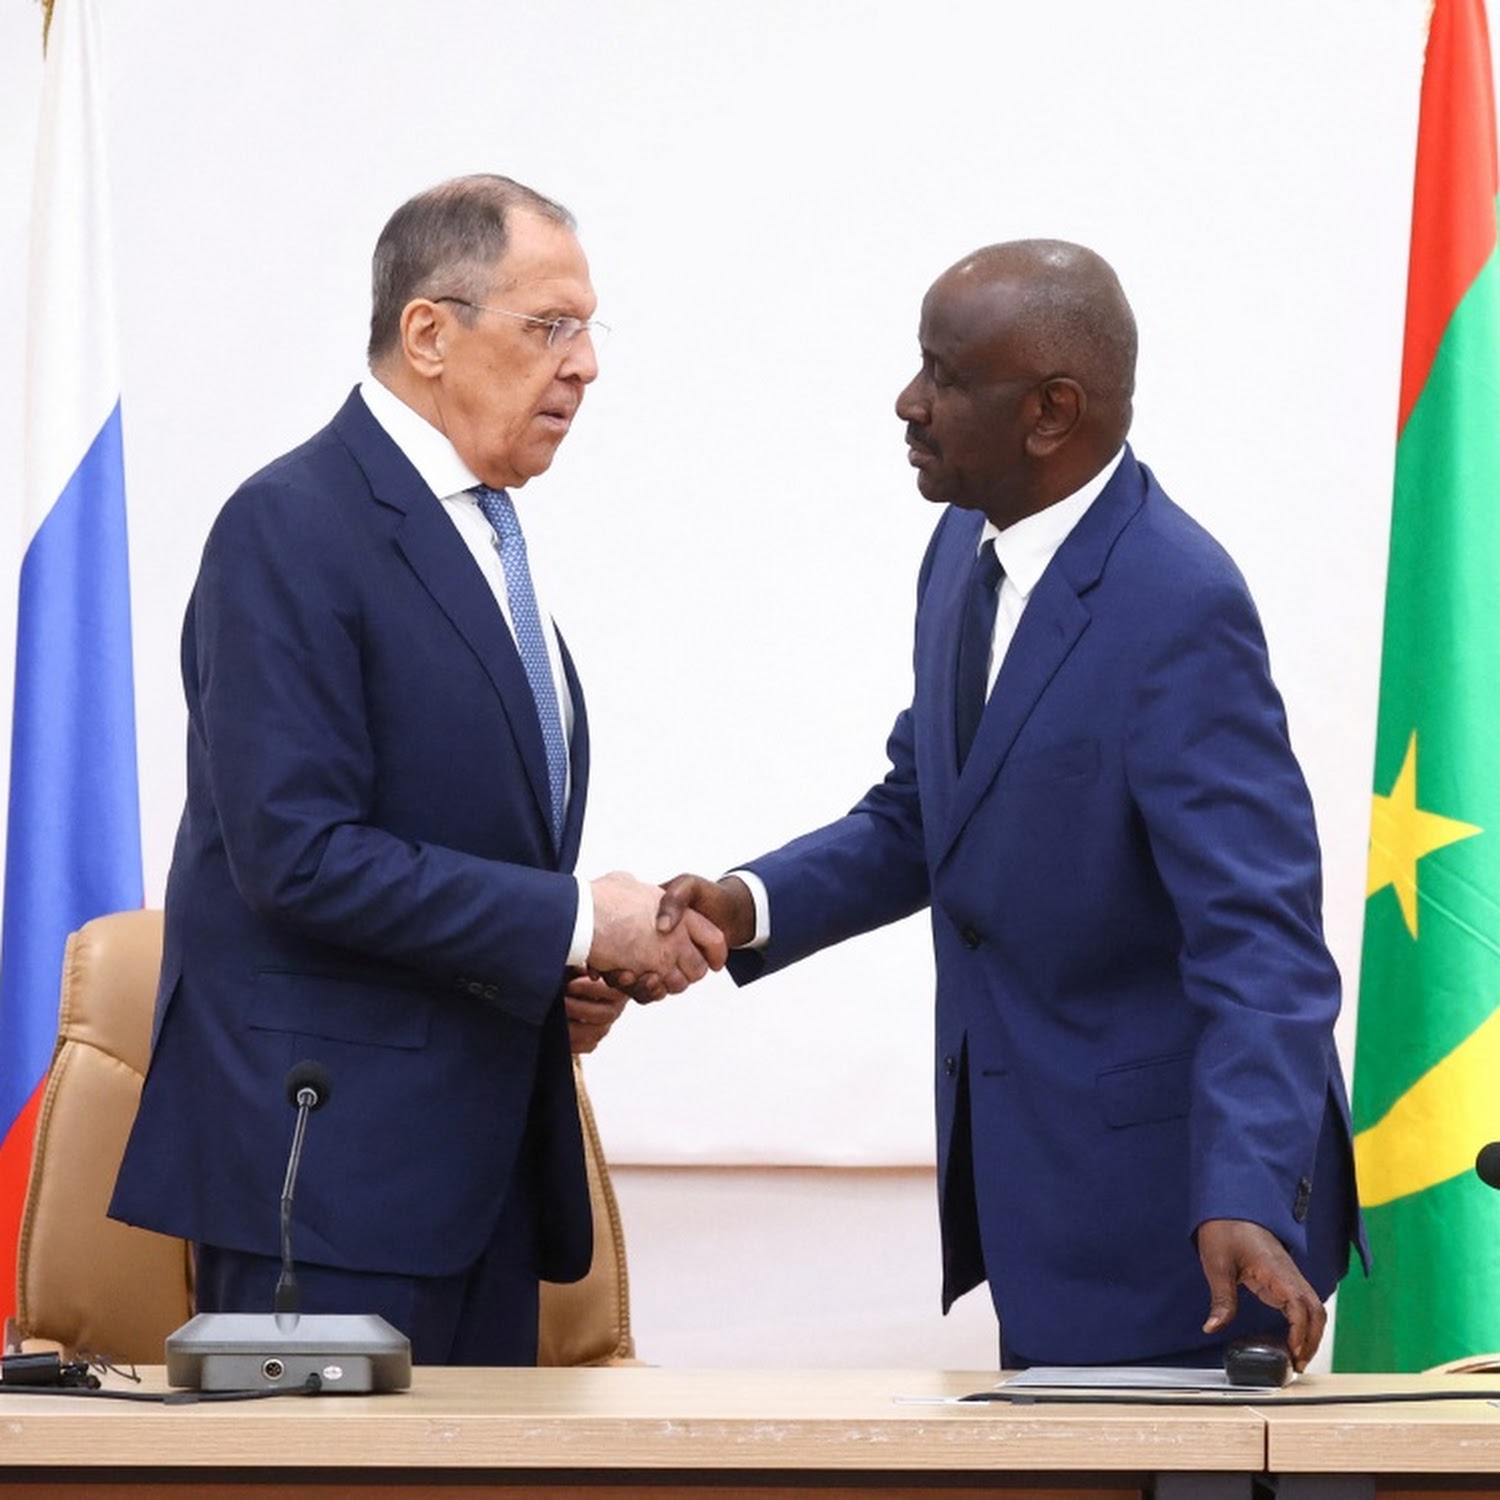 Russian, Western envoys converge on Sudan, offering divergent visions for Africa